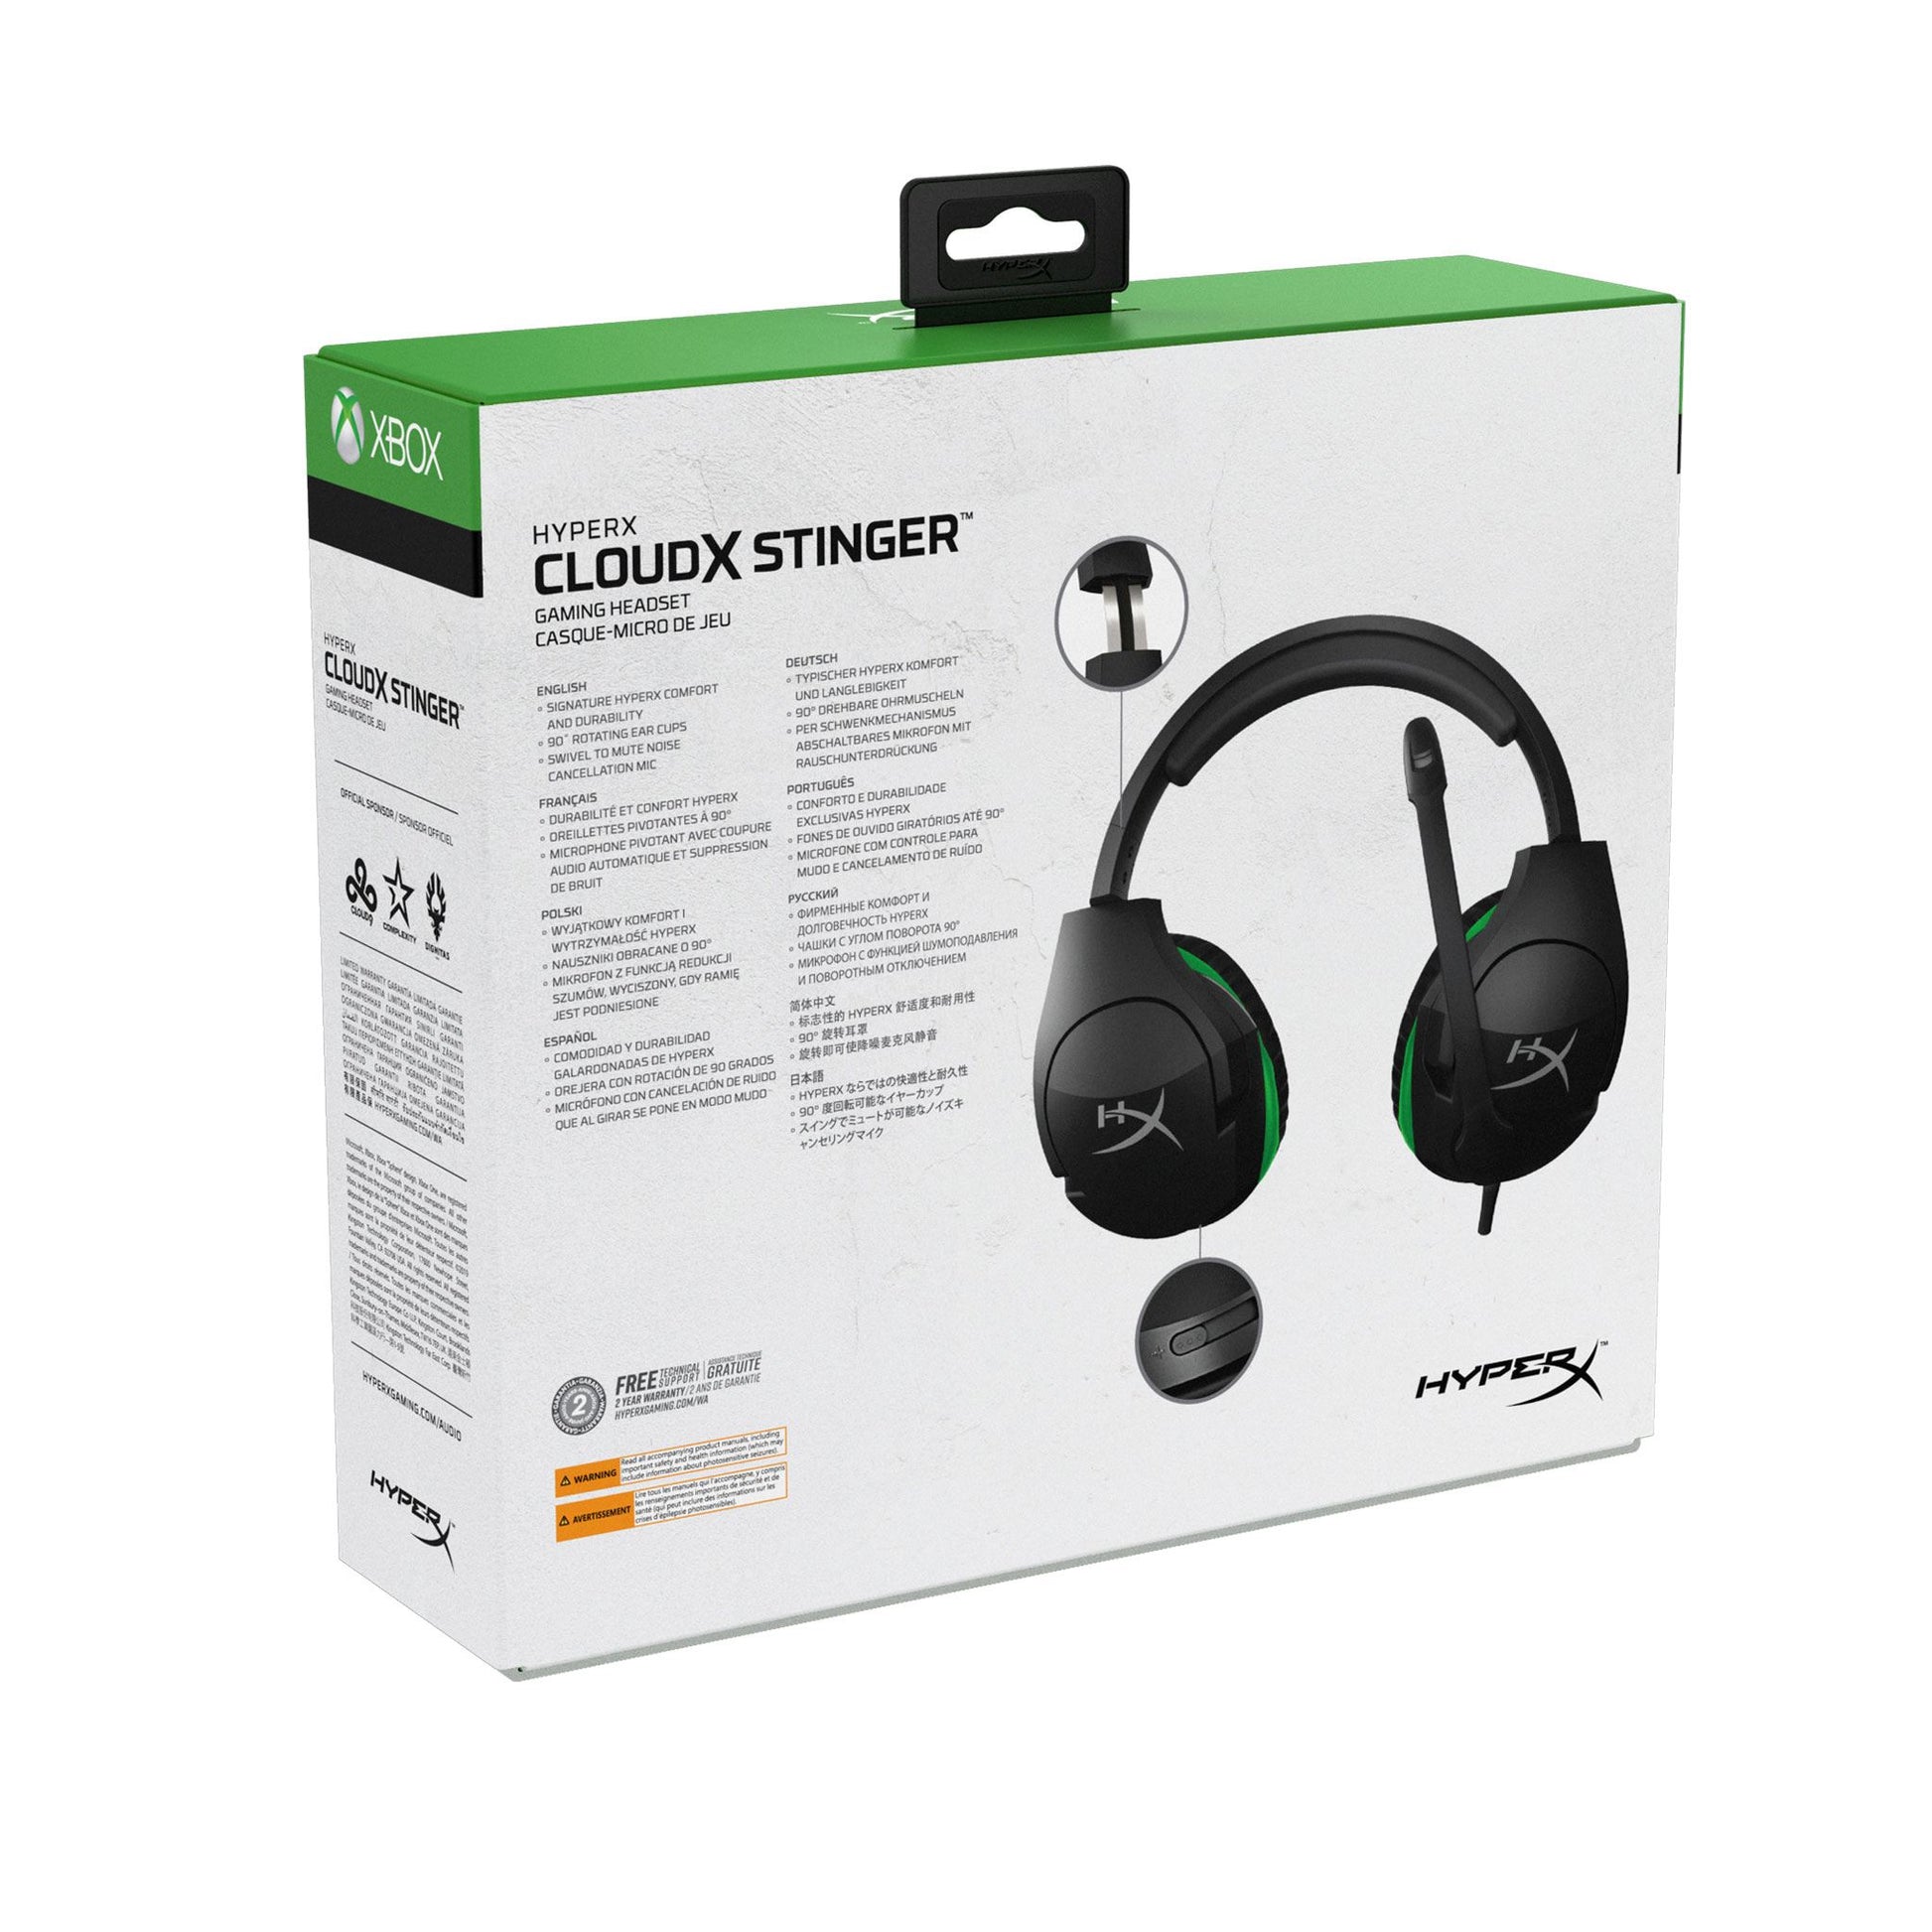 HyperX CloudX Stinger Wired Gaming SpadezStore for Headset Xbox - One/Series X|S